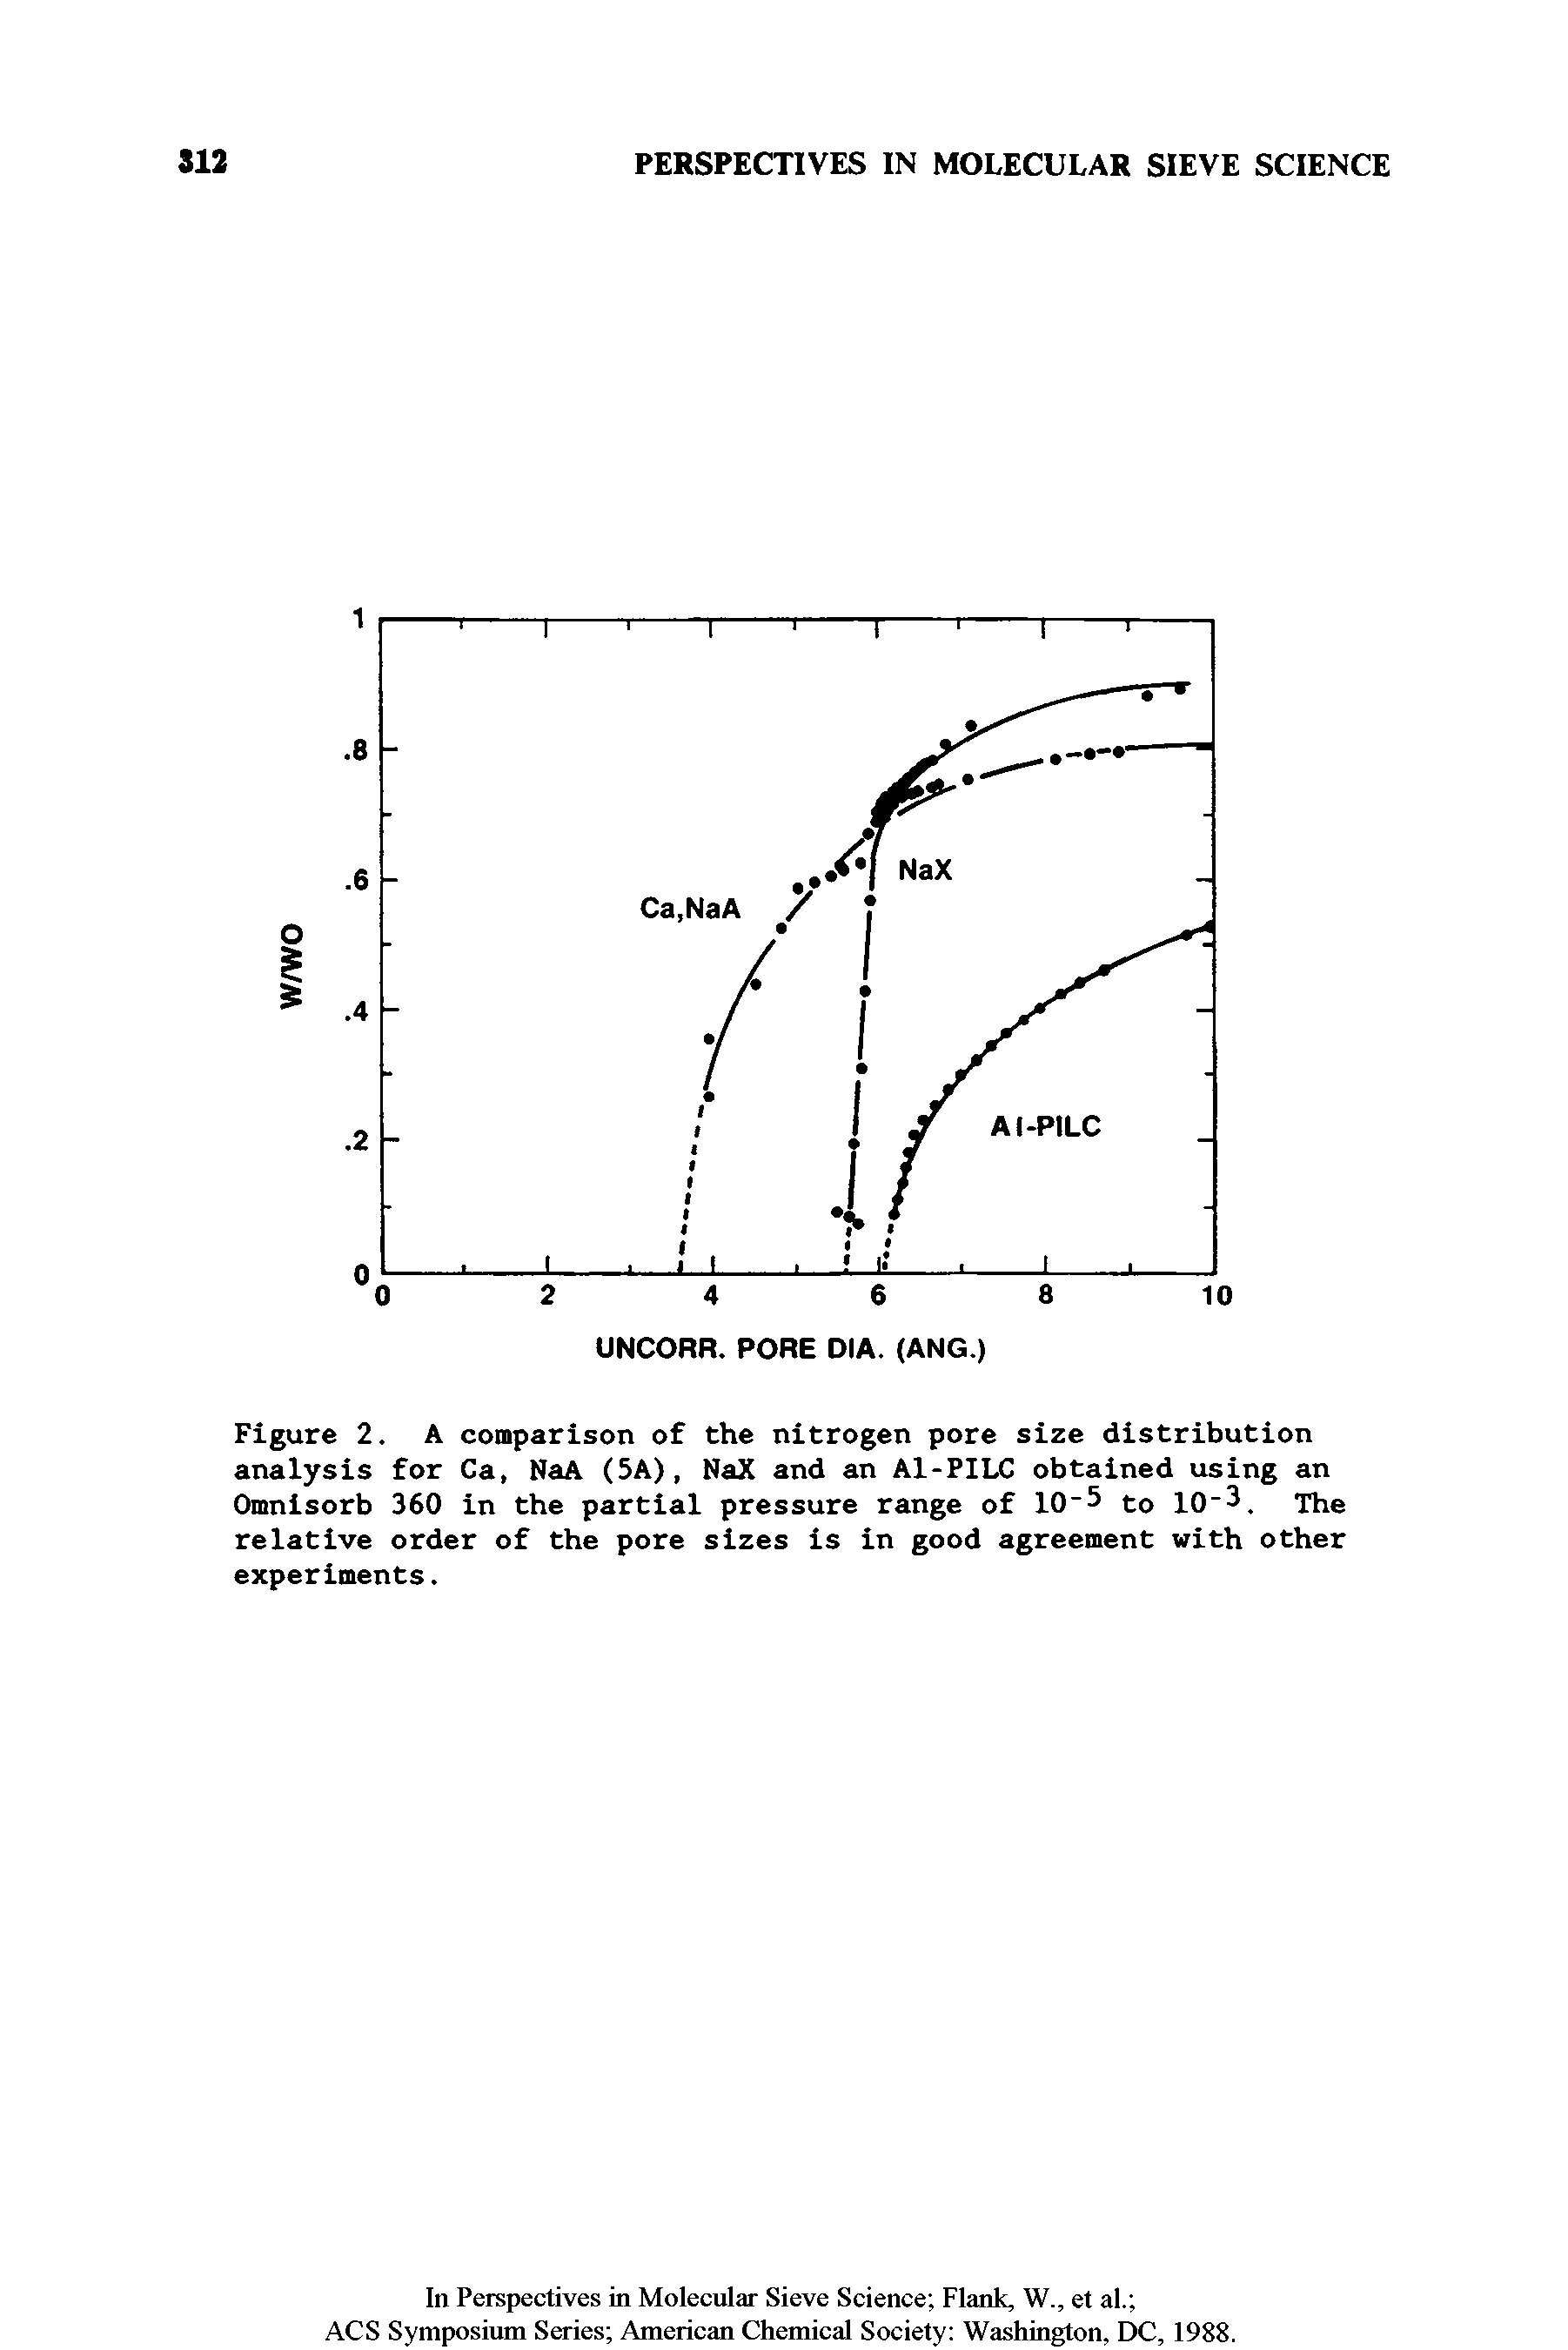 Figure 2. A comparison of the nitrogen pore size distribution analysis for Ca, NaA (5A), NaX and an Al-PILC obtained using an Omnisorb 360 in the partial pressure range of 10 5 to 10 3. The relative order of the pore sizes is in good agreement with other experiments.